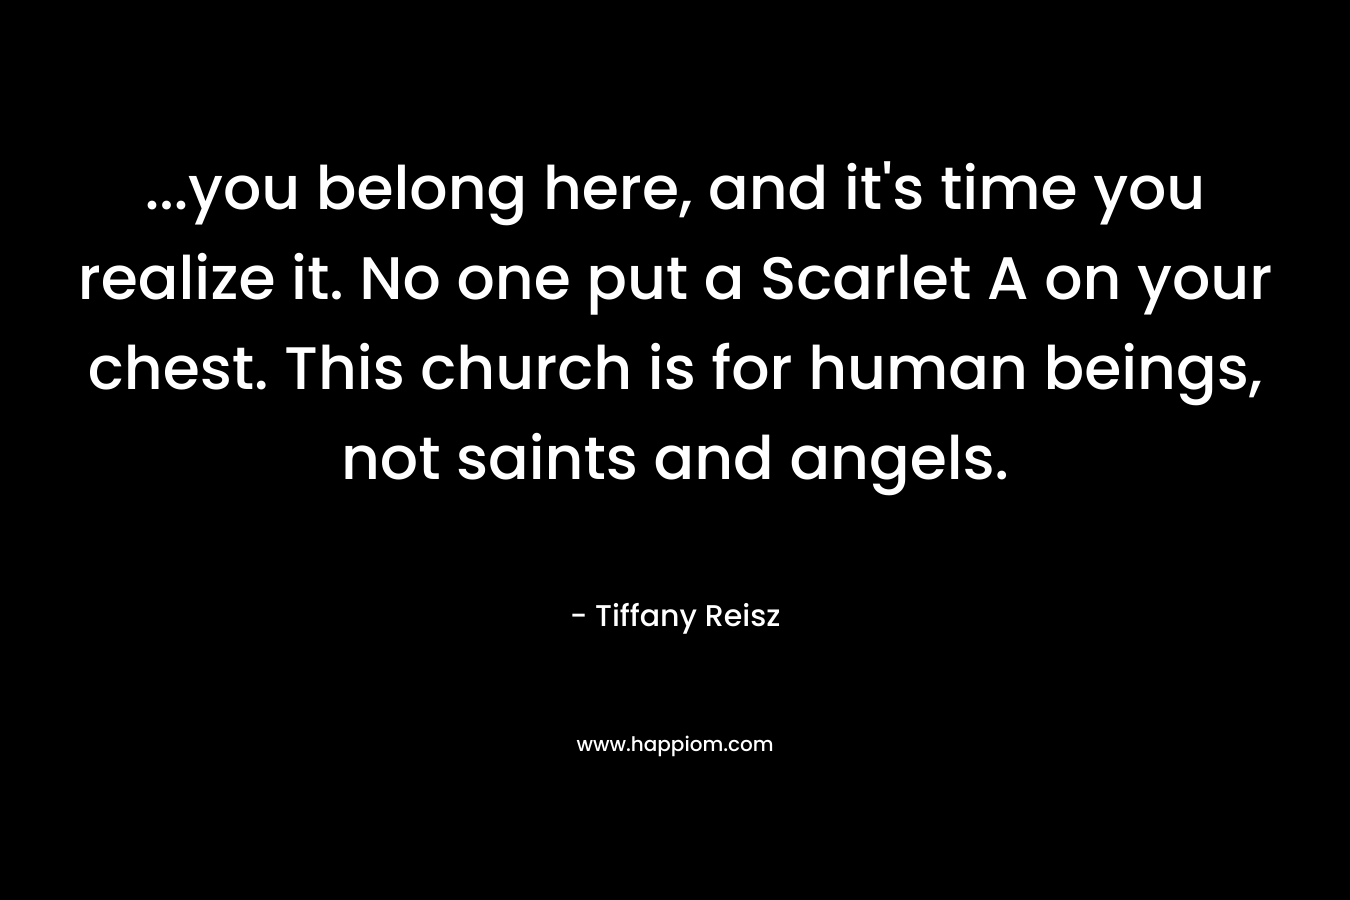 ...you belong here, and it's time you realize it. No one put a Scarlet A on your chest. This church is for human beings, not saints and angels.